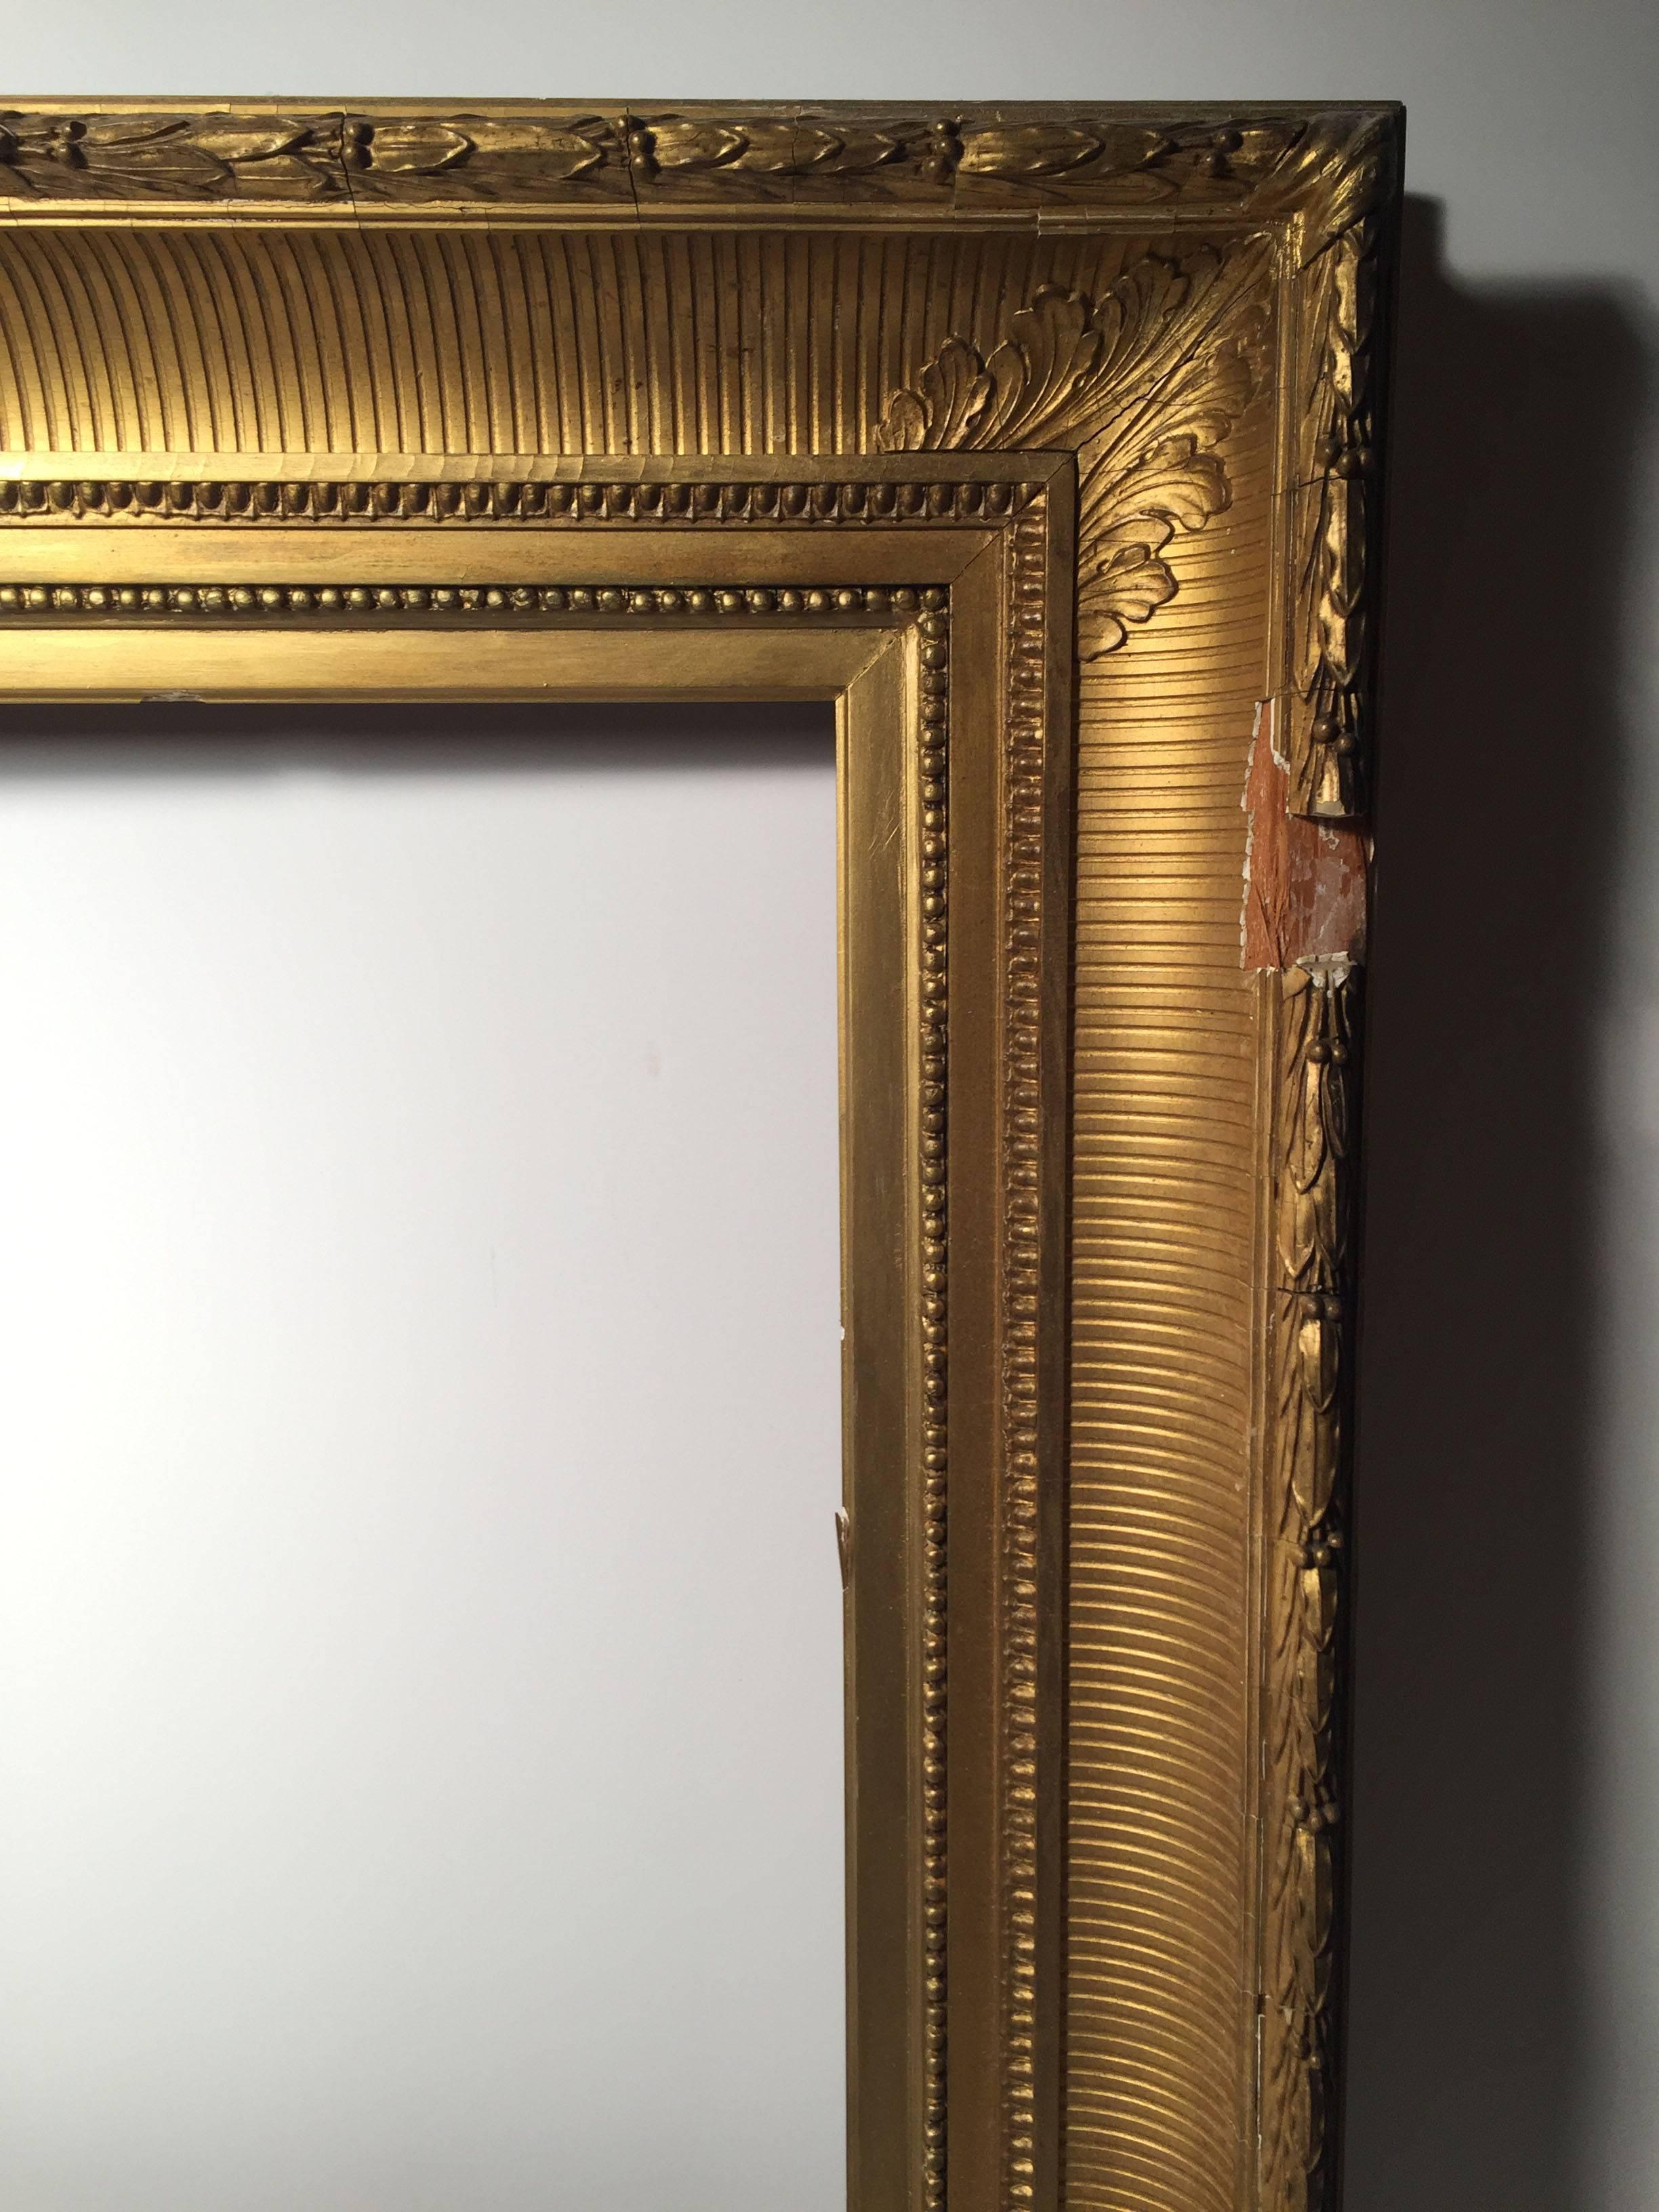 A nice early antique Hudson River School frame of quality construction and gilding.

the opening inside is 13.5